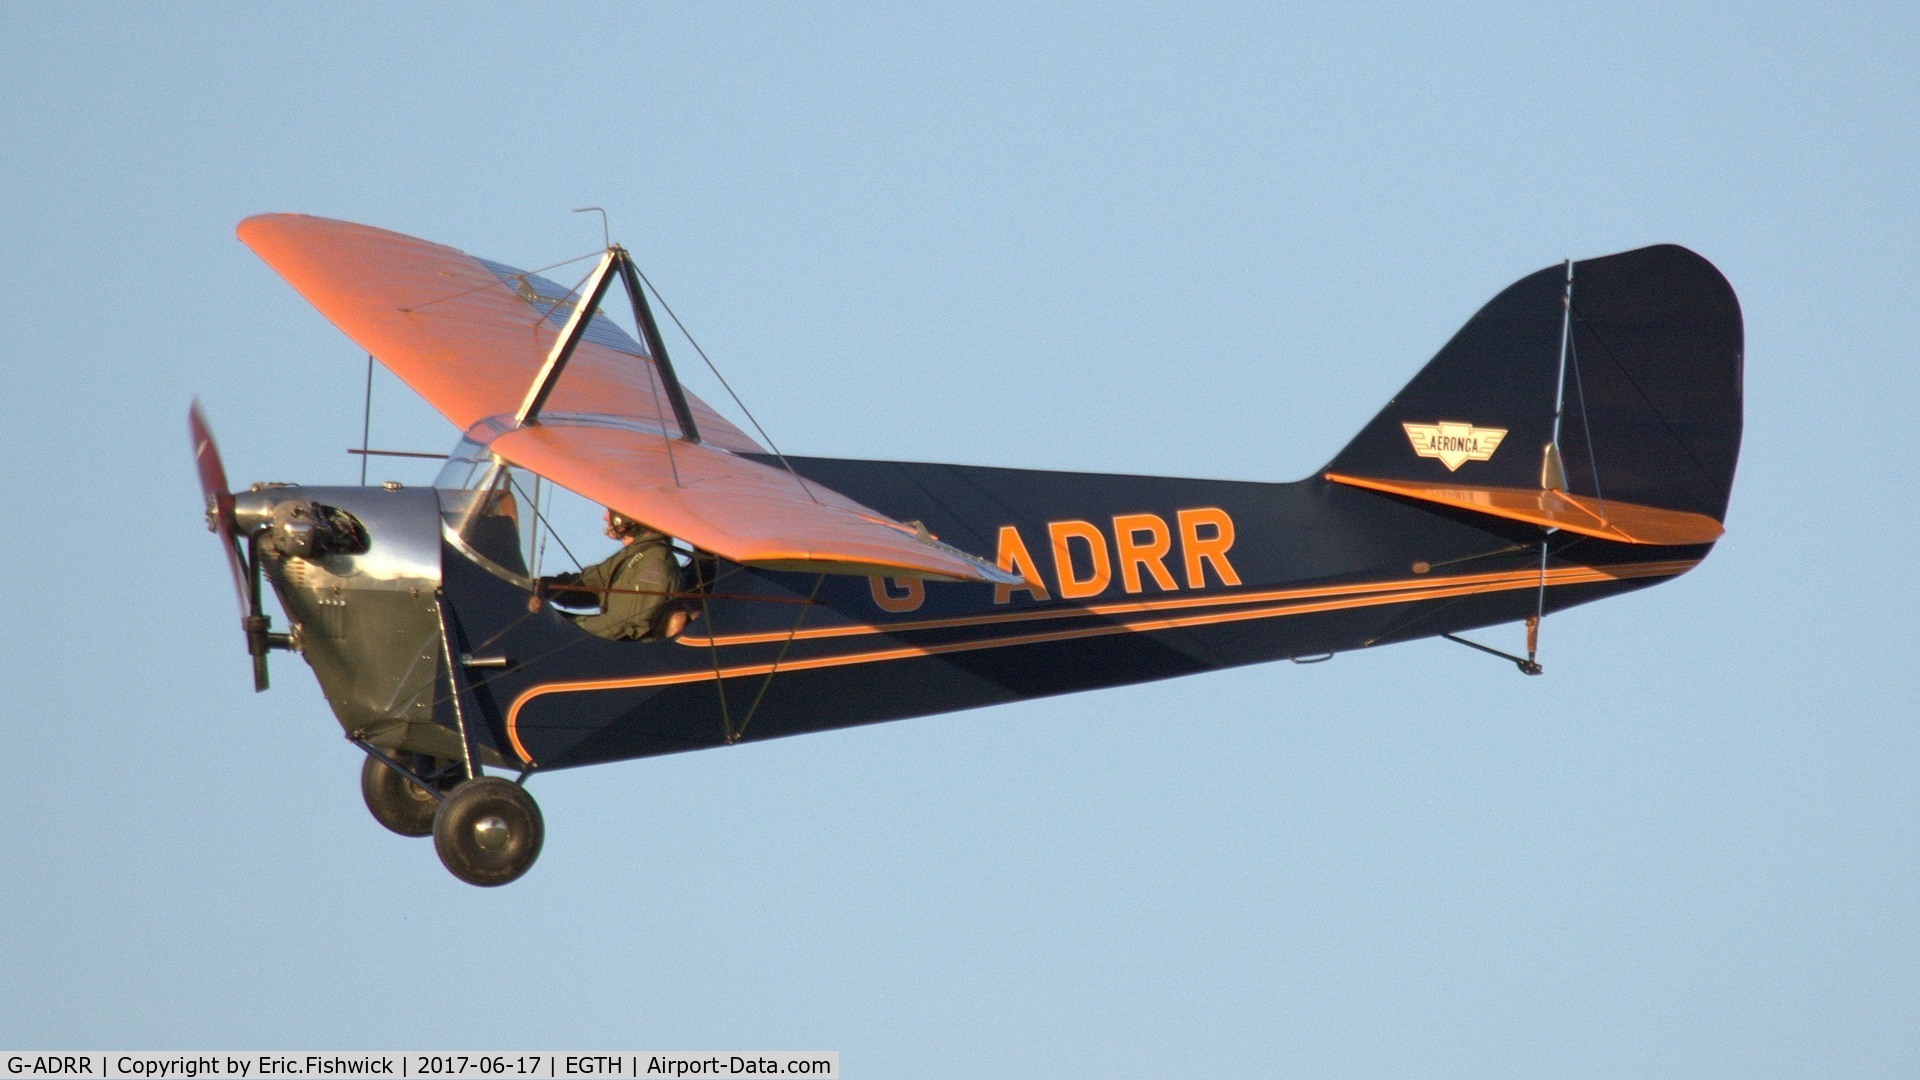 G-ADRR, 1936 Aeronca C-3 Collegian C/N A-734, 43. G-ADRR in display mode at the epic Evening Airshow, The Shuttleworth Collection, June, 2017